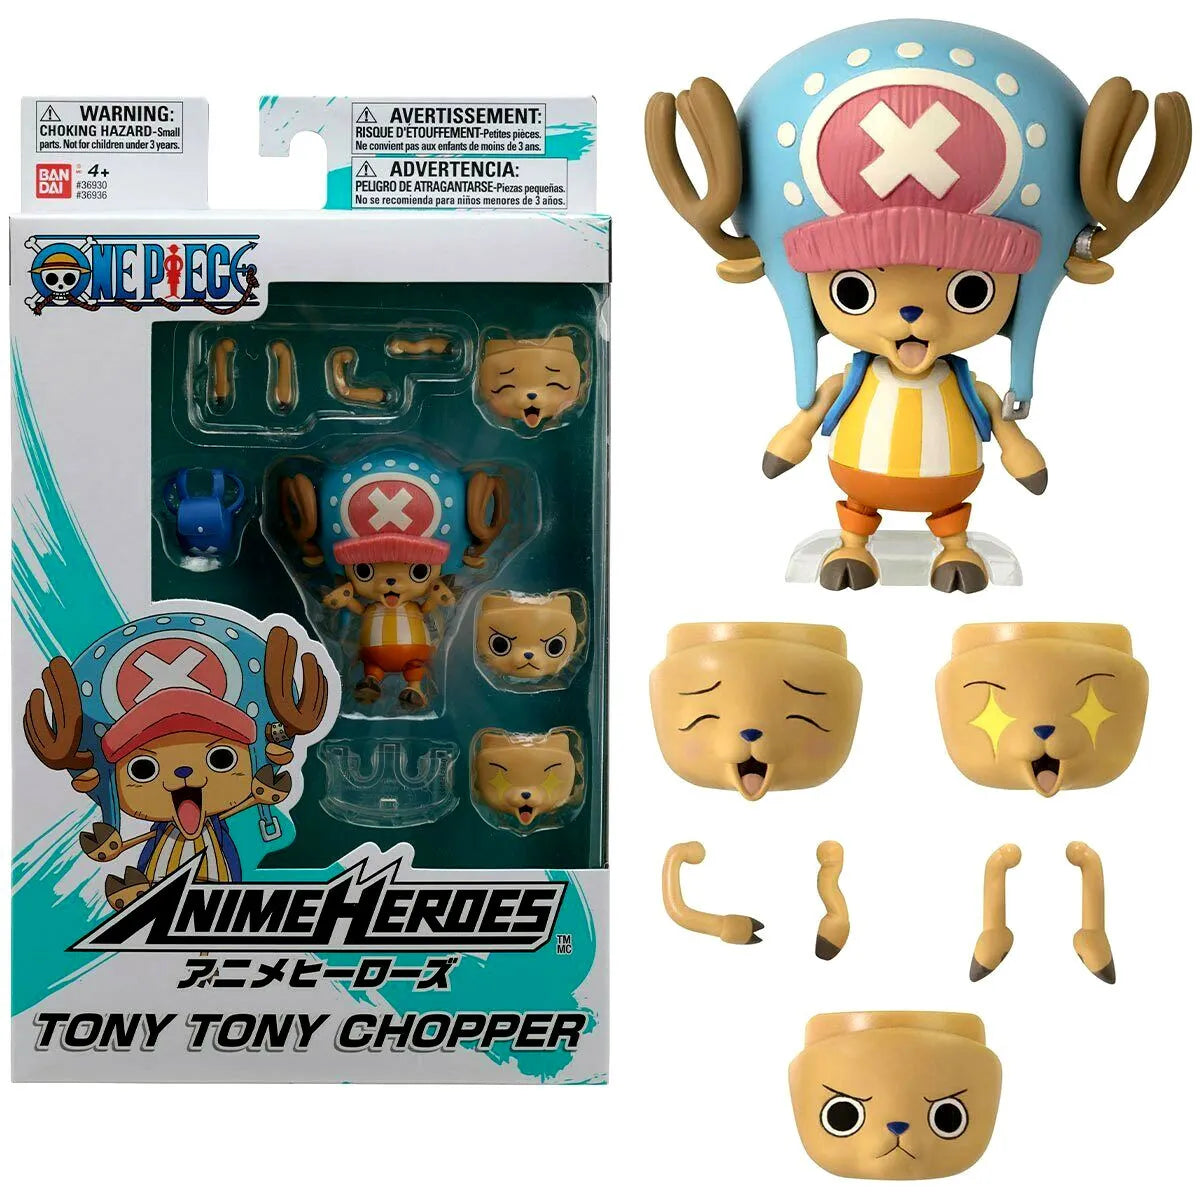 ONE PIECE - ANIME HEROES - CHOPPER (REPEAT) **Pre-Order**